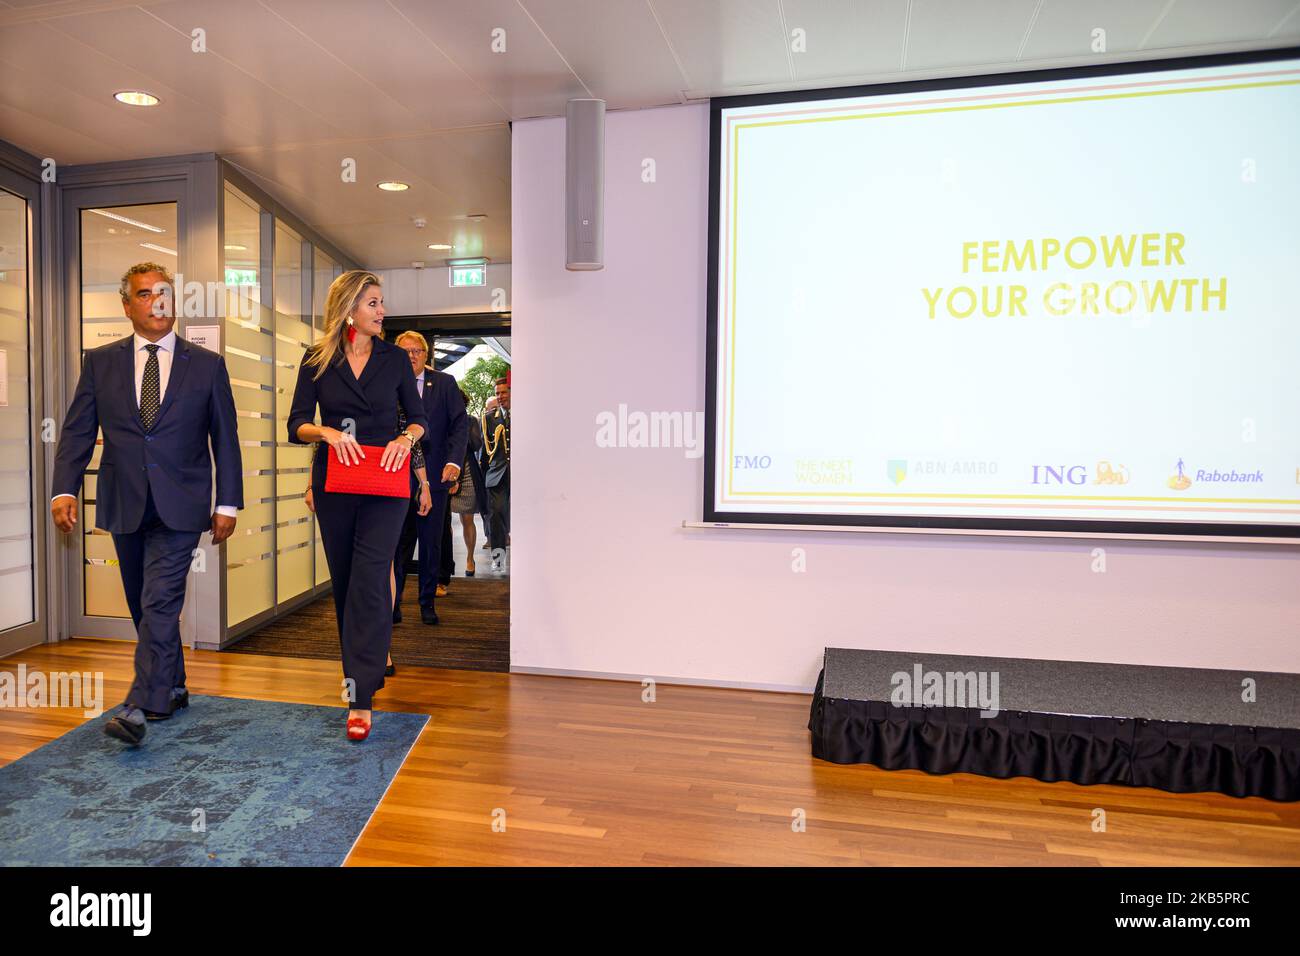 P. J. van Mierlo (L) and Queen Maxima of the Netherlands attend the workshop Fempower your growth program at the Dutch development bank, FMO, in The Hague, The Netherlands, 11 September 2019. This program from FEM.NL and The Next Women, focuses on stimulating female entrepreneurship and improving access to finance for female entrepreneurs. The ''FEmpower Growth Program'' is a pilot-project that runs from June to September 2019 and is intended for female entrepreneurs and Bank representatives, aiming at improving access to finance, building relevant networks and increasing entrepreneurial skill Stock Photo